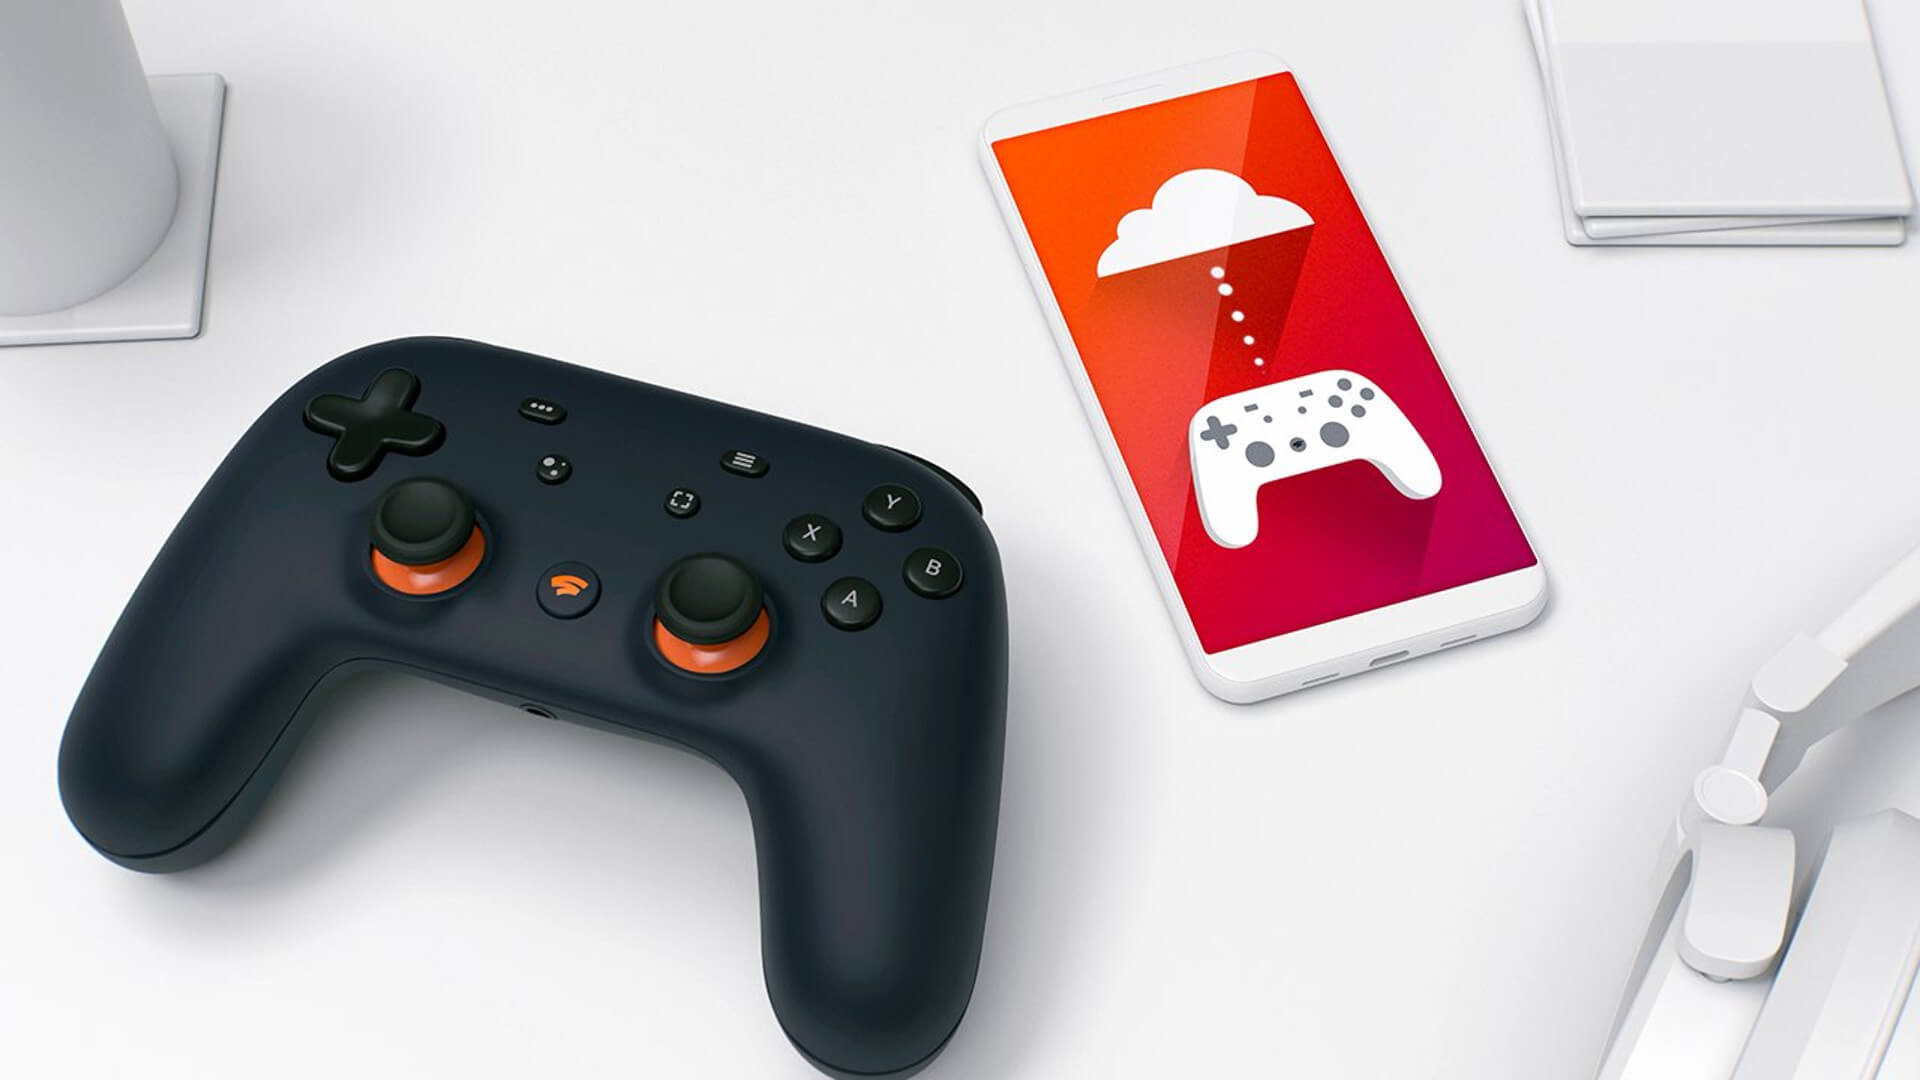 A Google Stadia controller and a phone showing a Google Stadia icon